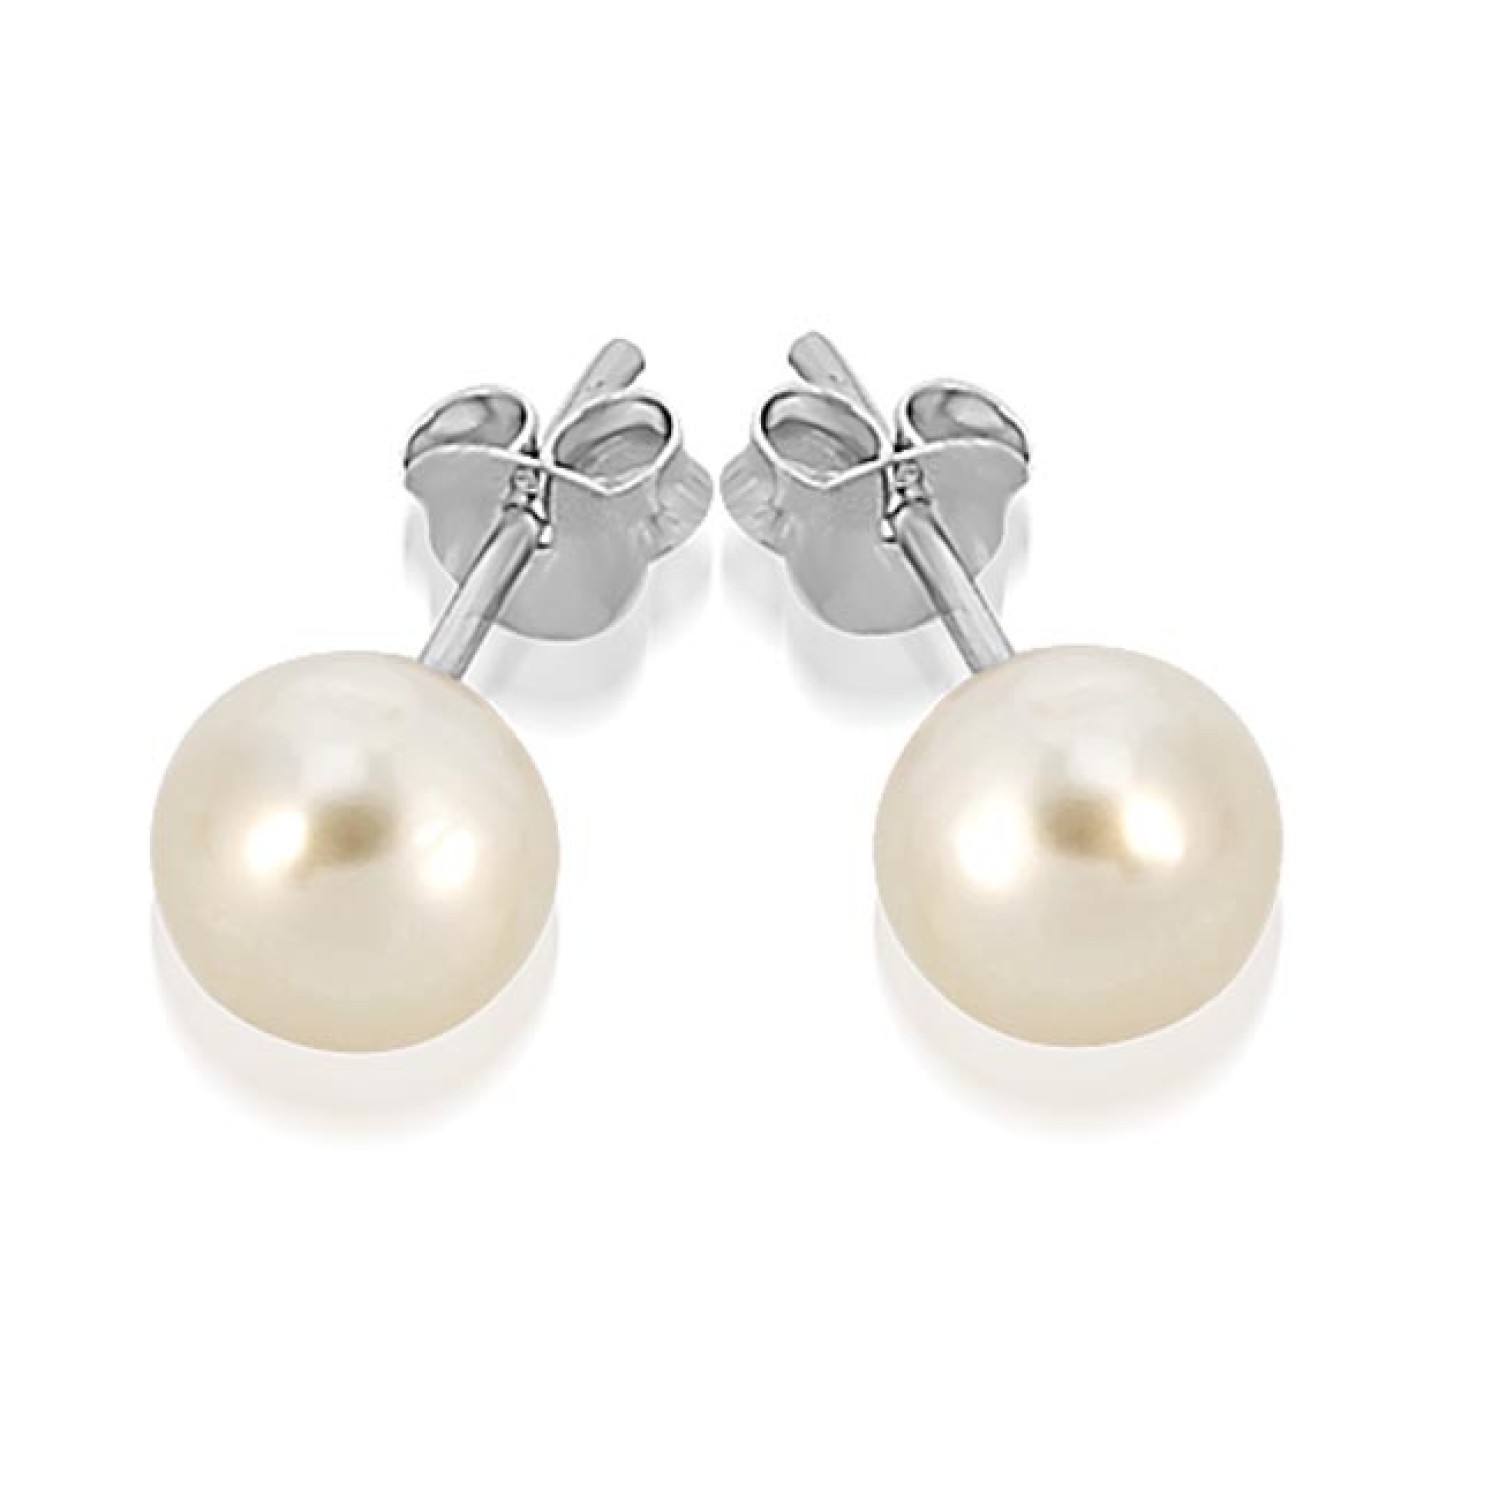 Pearl Stud Earrings 5mm. Sterling Silver and Freshwater Pearl White Stud Earrings 5mm Crafted in 925 Sterling silver   Hypoallergenic - i.e. does not cause allergic reactions set with 5mm freshwater pearl Gift wrapped if requir @christies.online